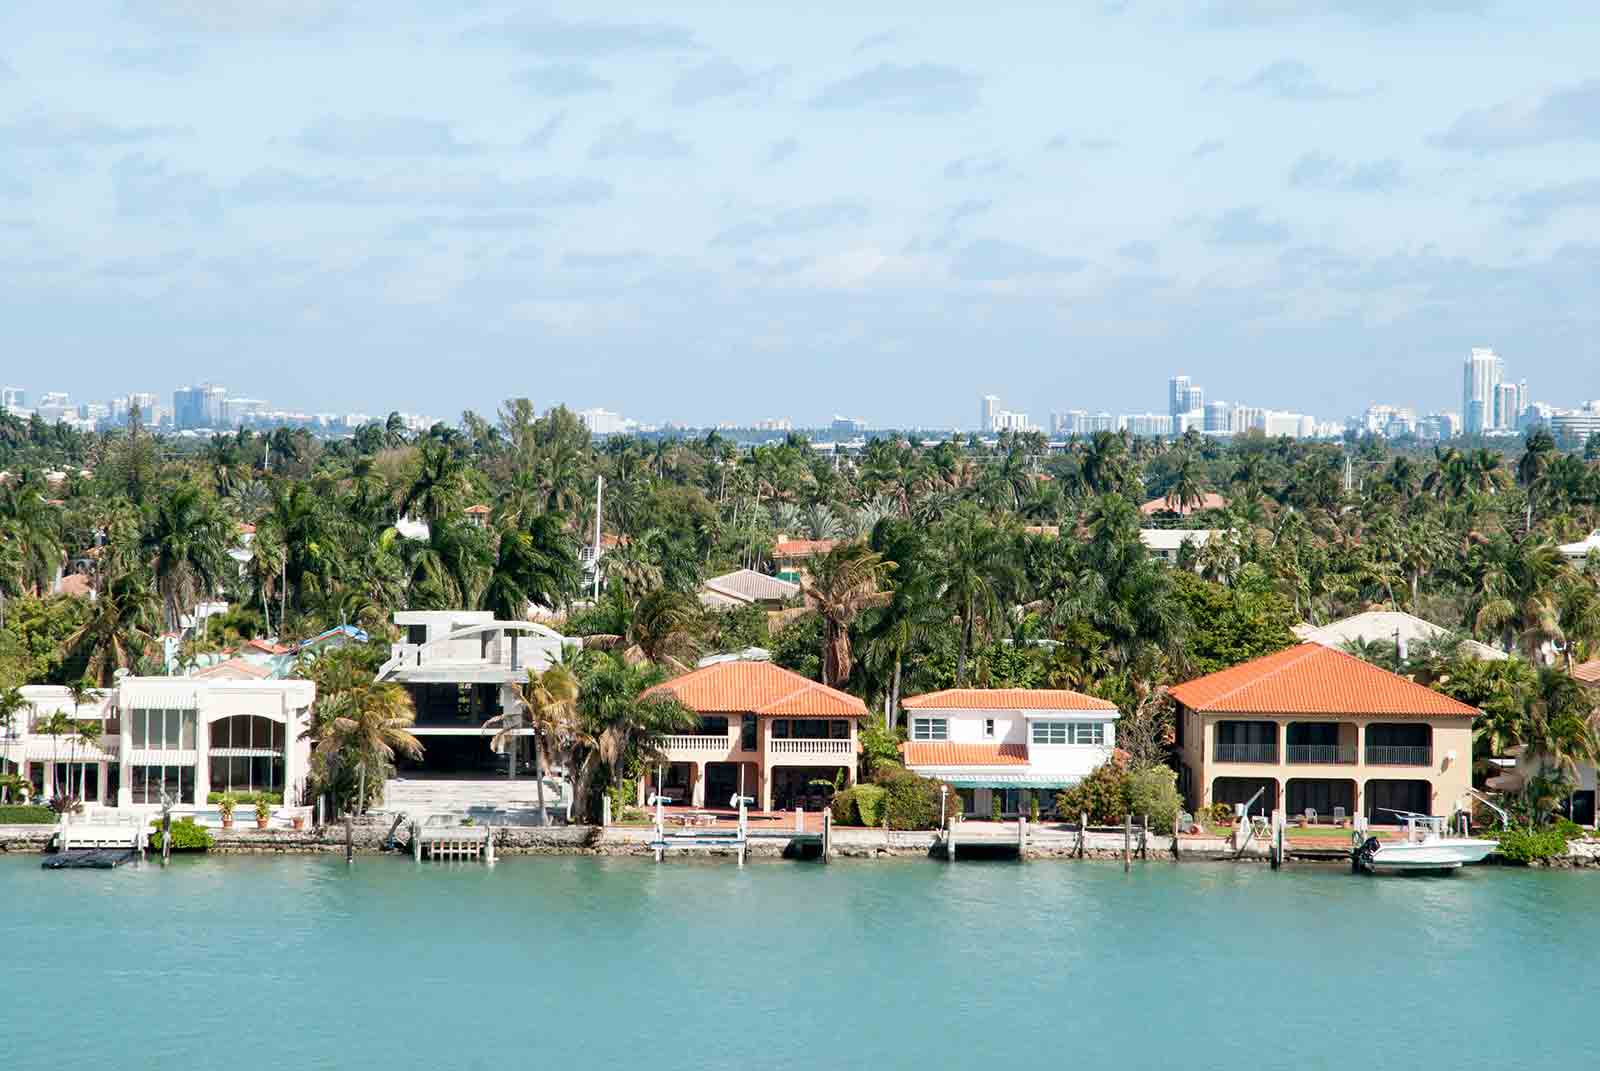 Aerial shot of waterfront homes in affluent neighborhood in Miami